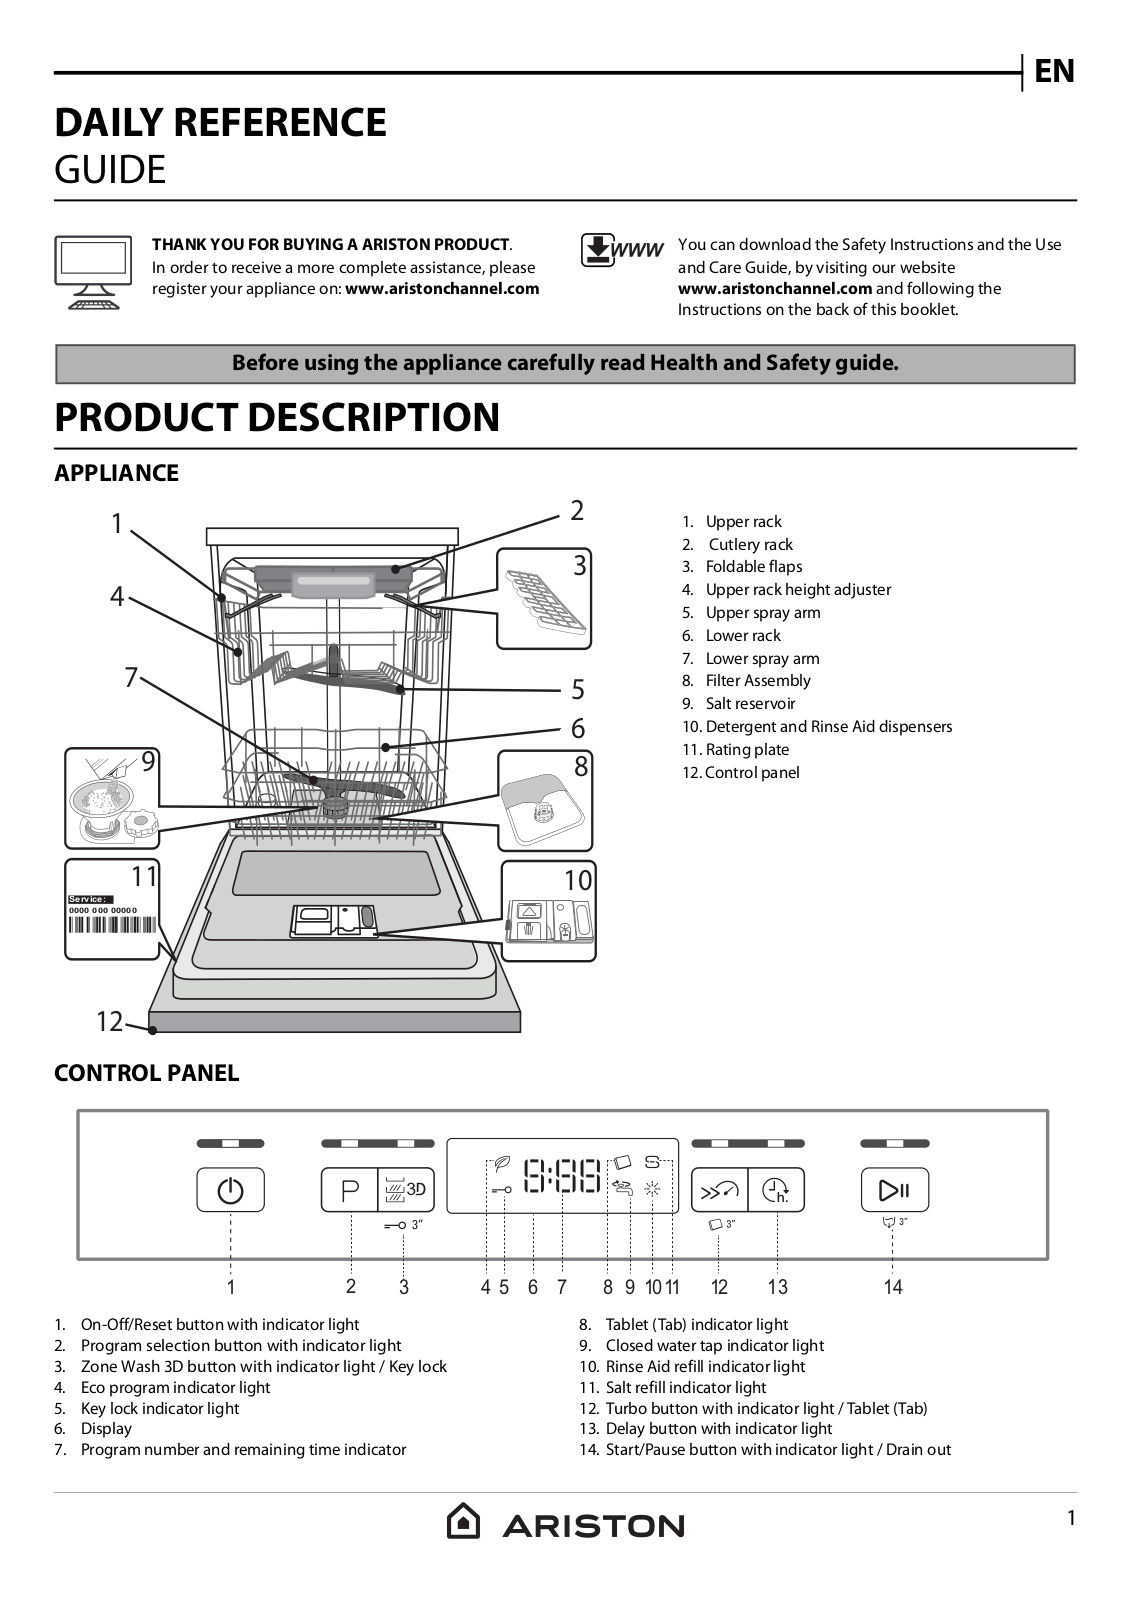 ARISTON LFO 3C23 WF X Daily Reference Guide